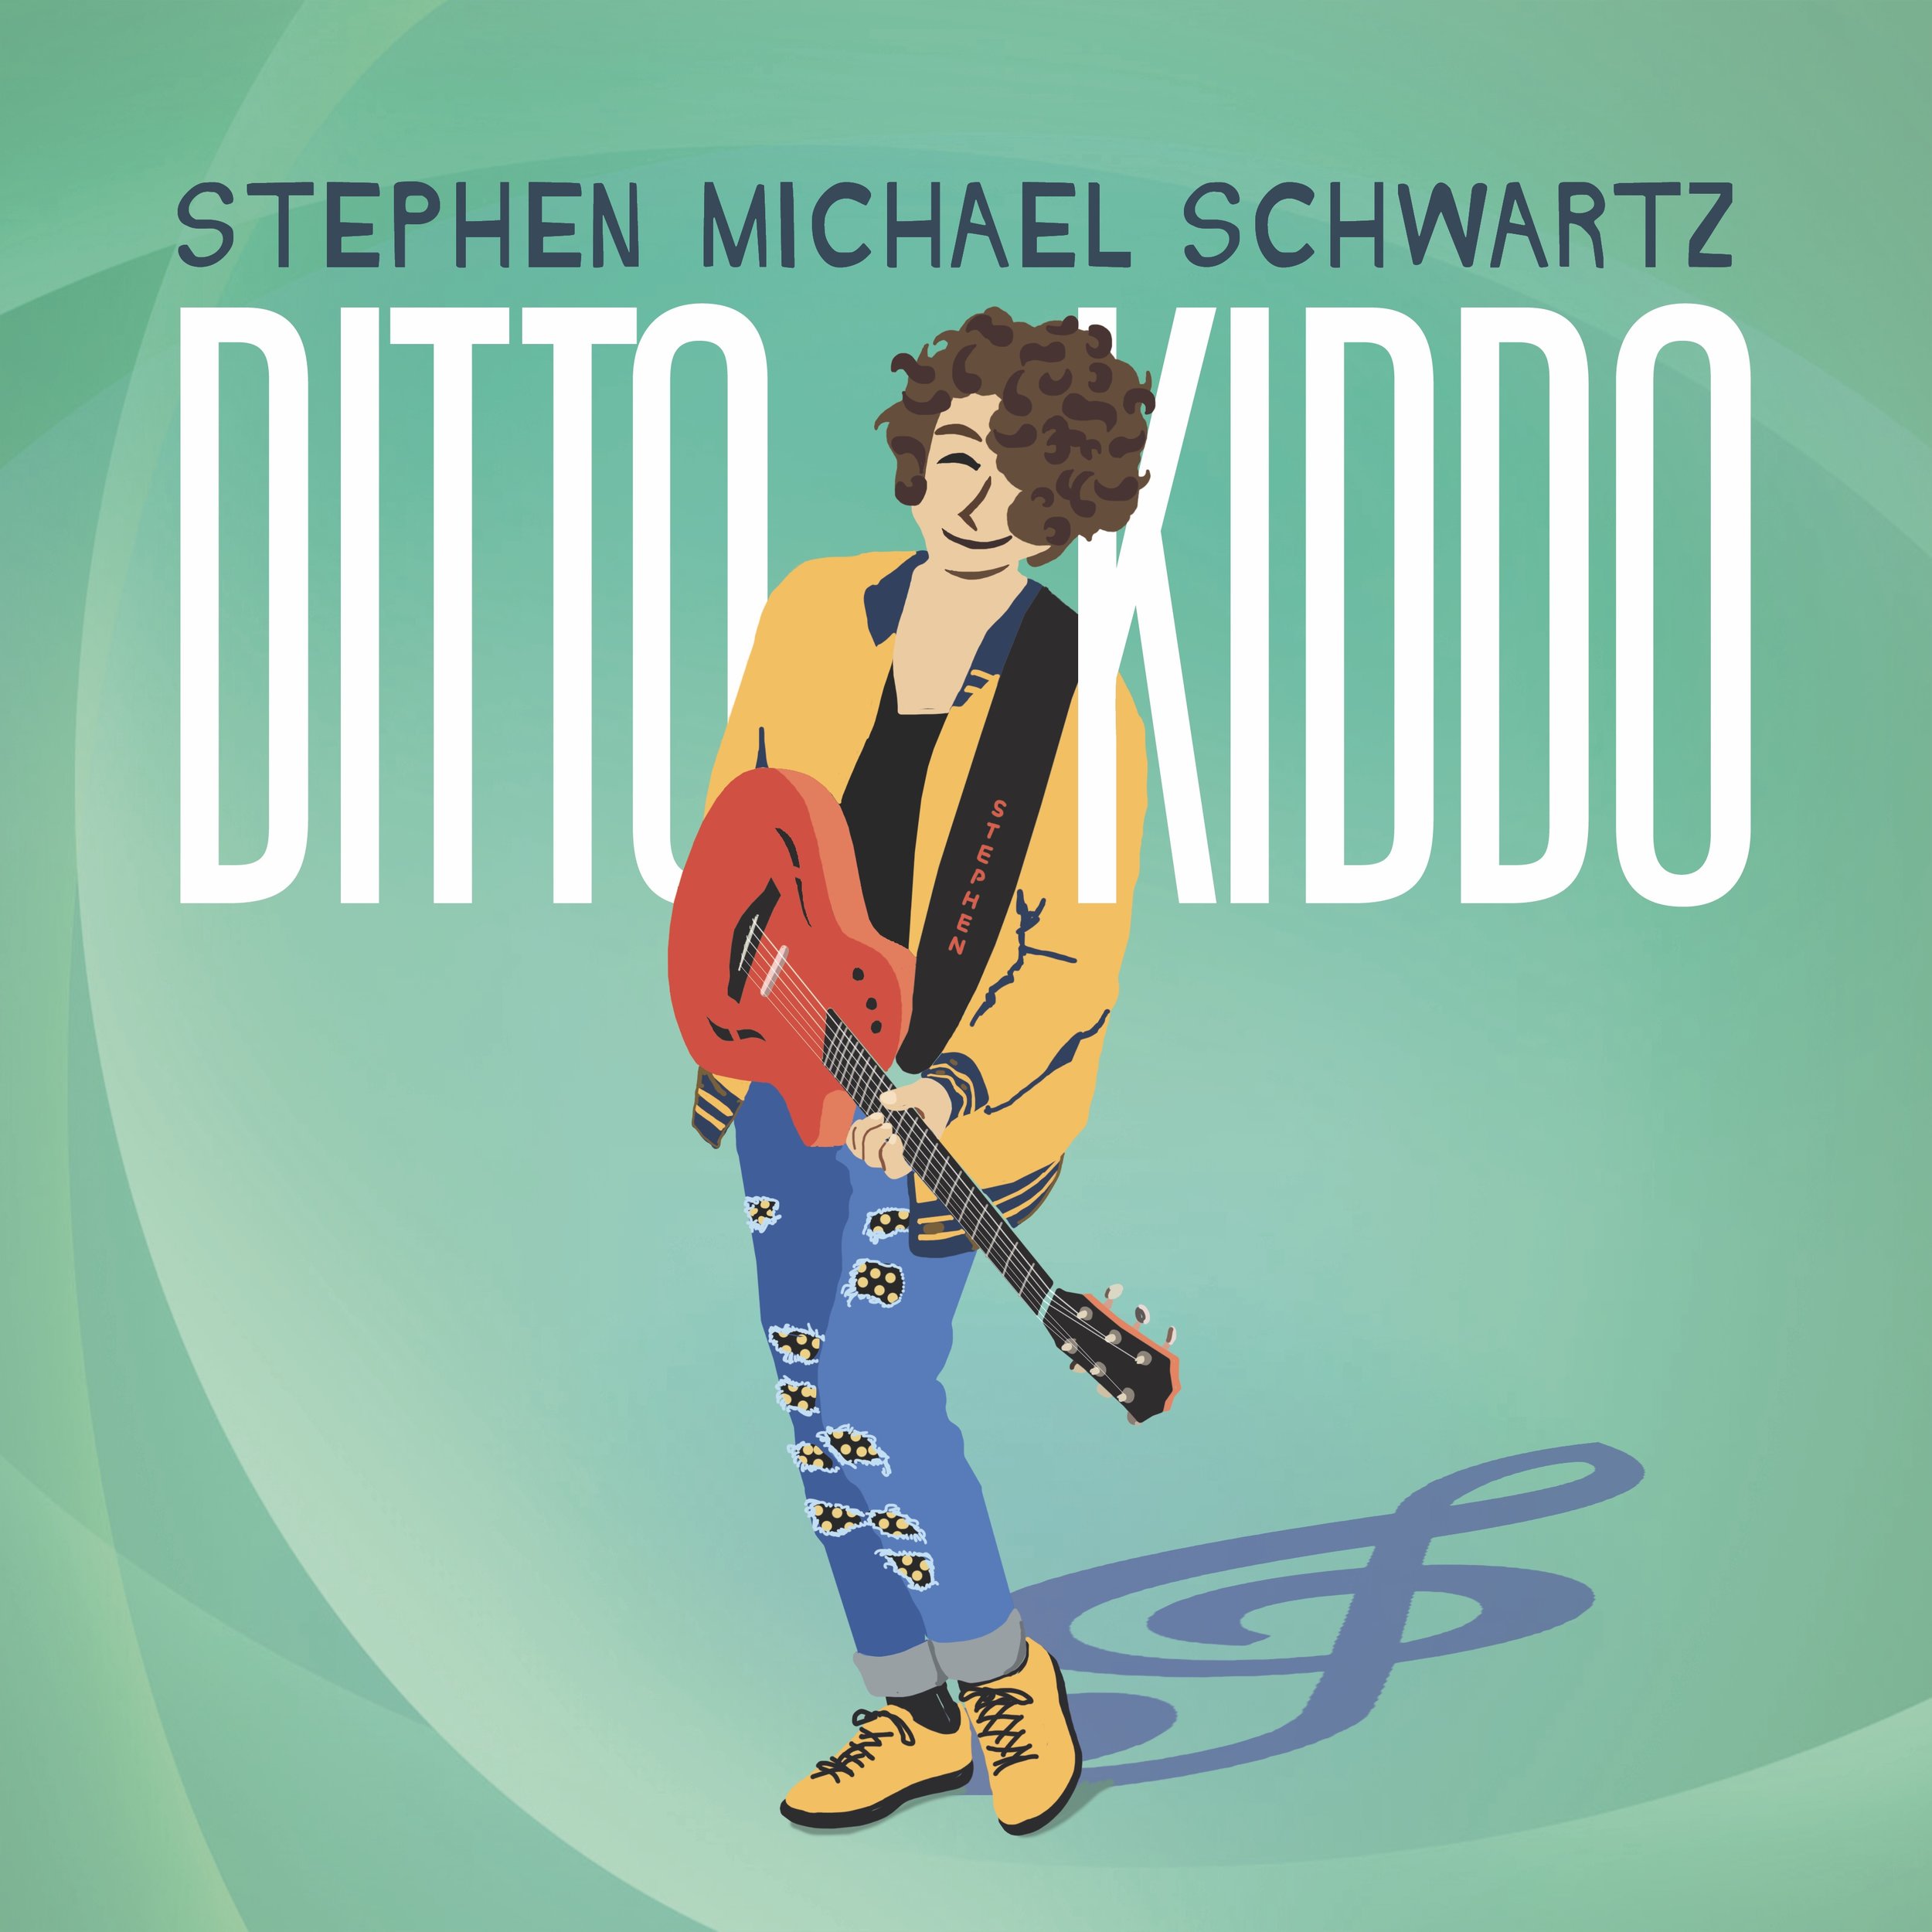 Ditto Kitto Final Cover High Res copy.jpg